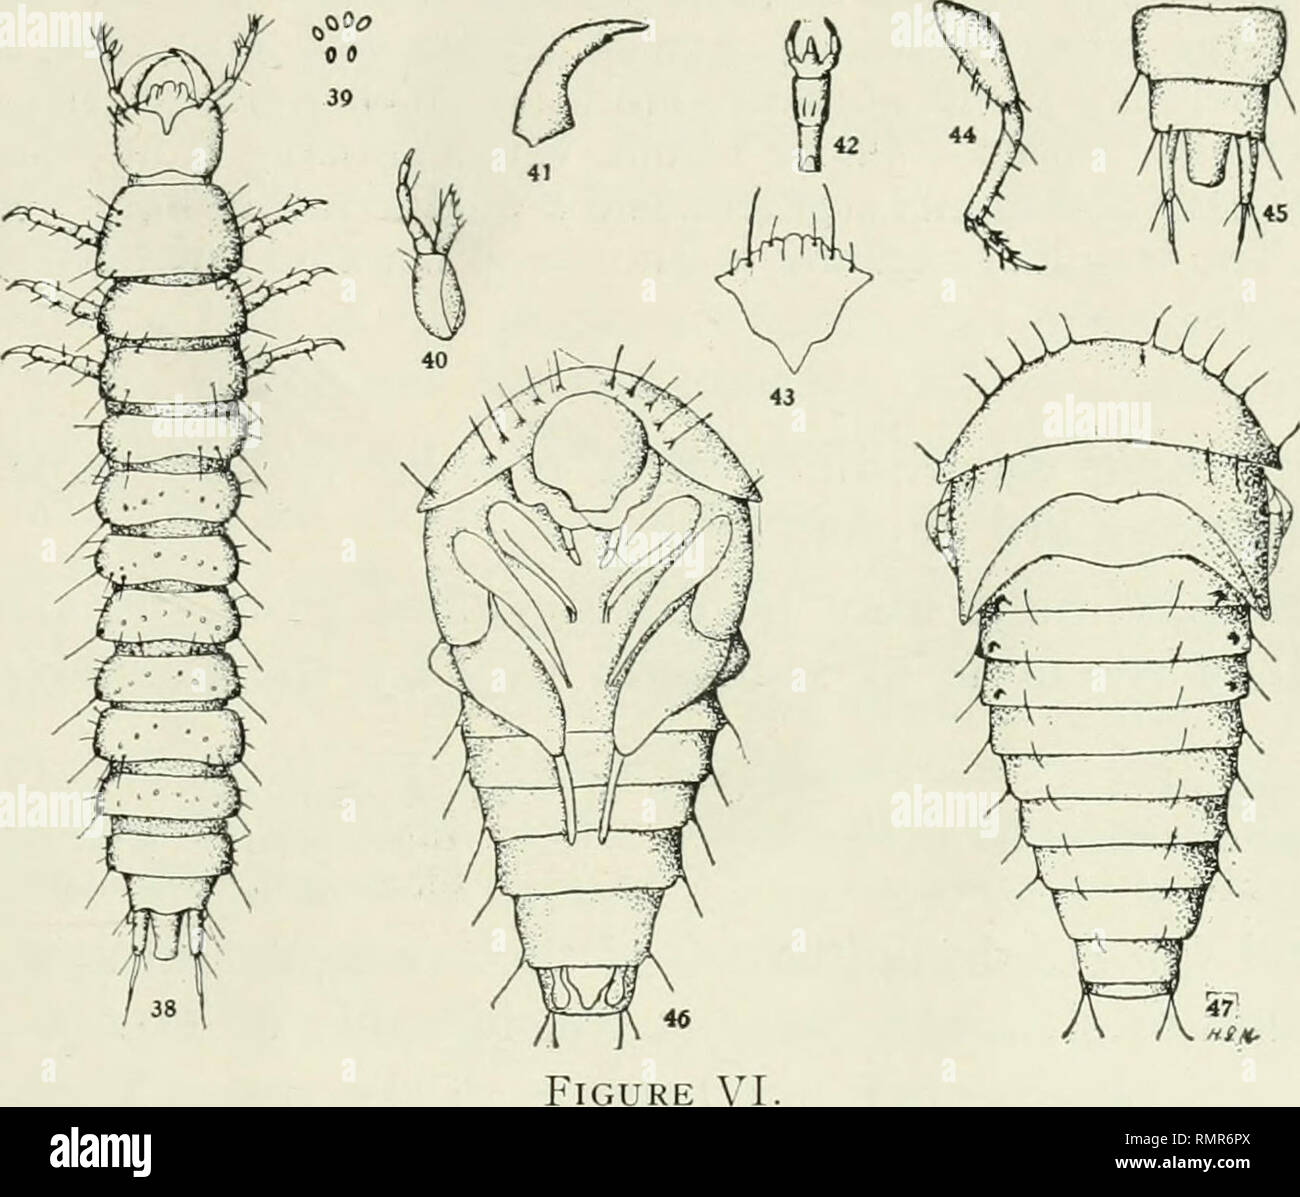 . Annals. Entomology. 1923] Mank: Biology of Staphylinidce 235 Tachinus flavipennis Dcj. Fig. VI.) Larva.—(Length, 7 mm.) This larva is Hnear, slightly depressed, and not as slender as most of the other forms studied. Instead of tapering toward the end of the body, there is a slight widening toward the posterior region. The color is distinctly brown. Each abdominal segment has two chitinized plates, one on the dorsal and one on the ventral side.. Fig. VI. Tachinus flavipennis Tie]. 38, Larva, dorsal view. 39, Ocelli. 40, Maxilla. 41, Mandible. 42, Labium. 43, Upper lip. 44, Leg. 45, Pseudopode Stock Photo